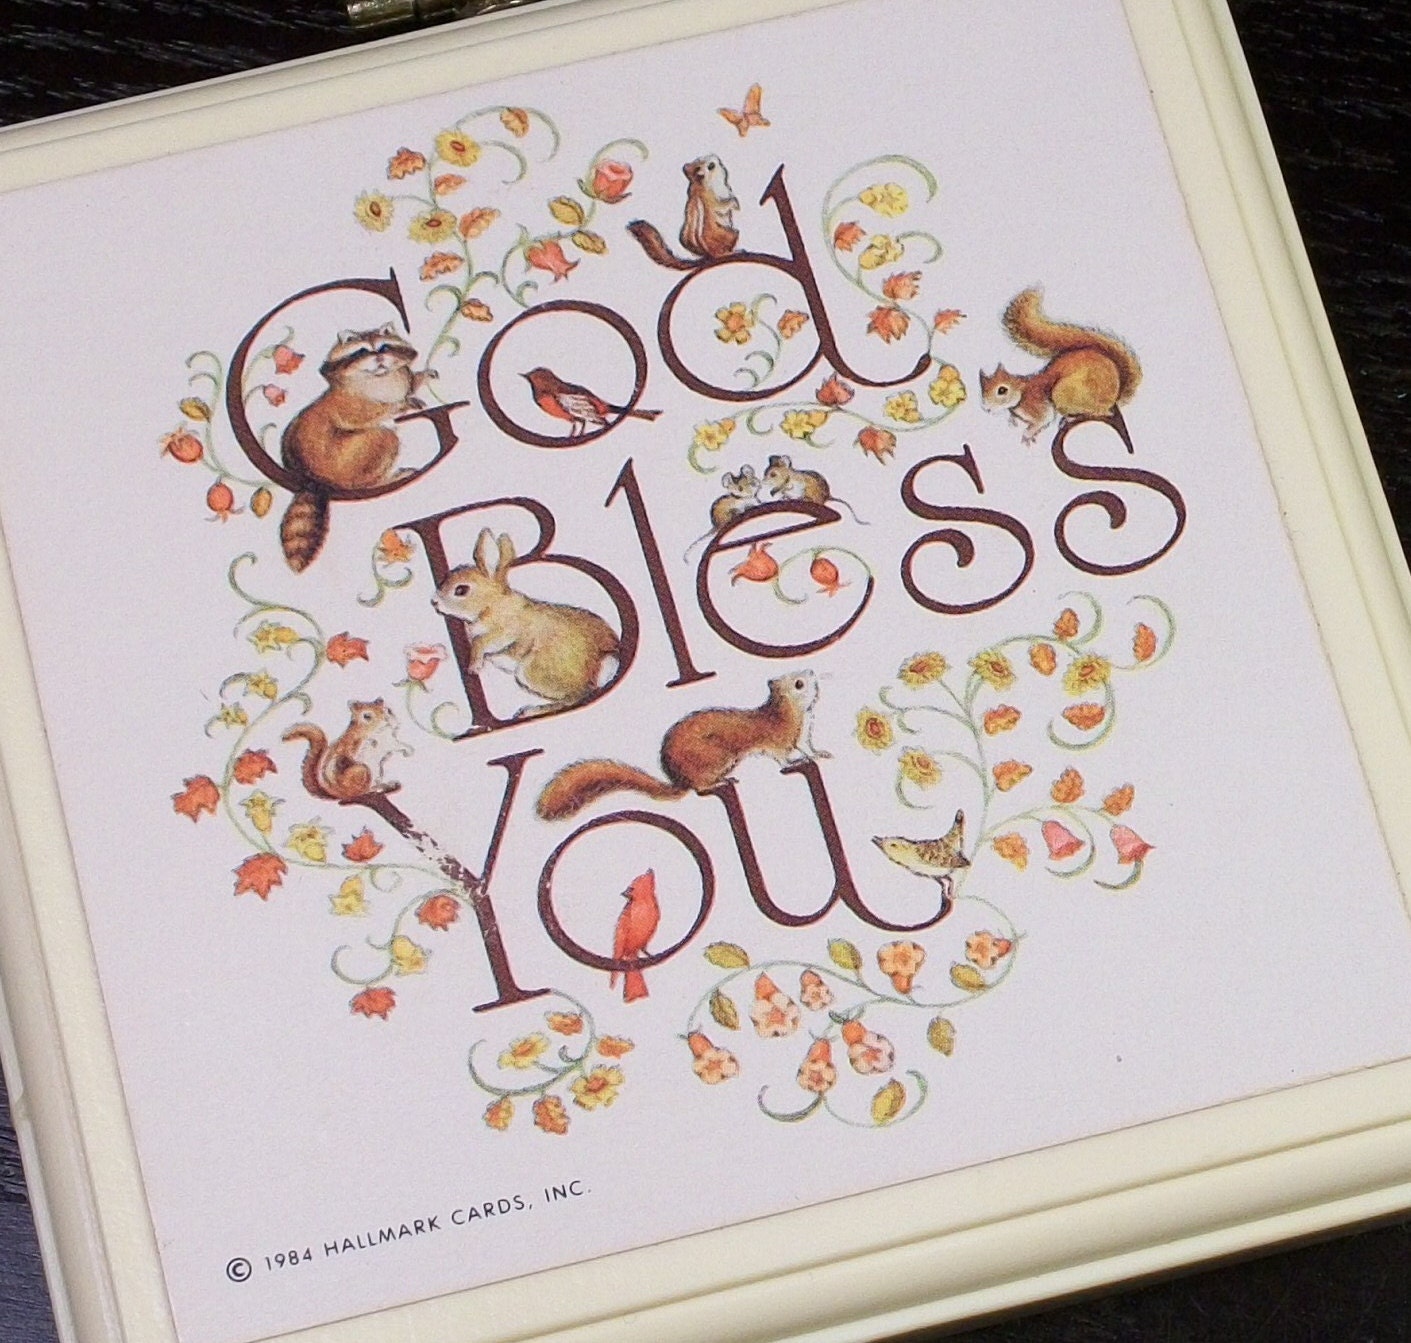 Vintage Hallmark Mini Plaque "God Bless You" Cream Forest Animals Leaves Flowers1980's